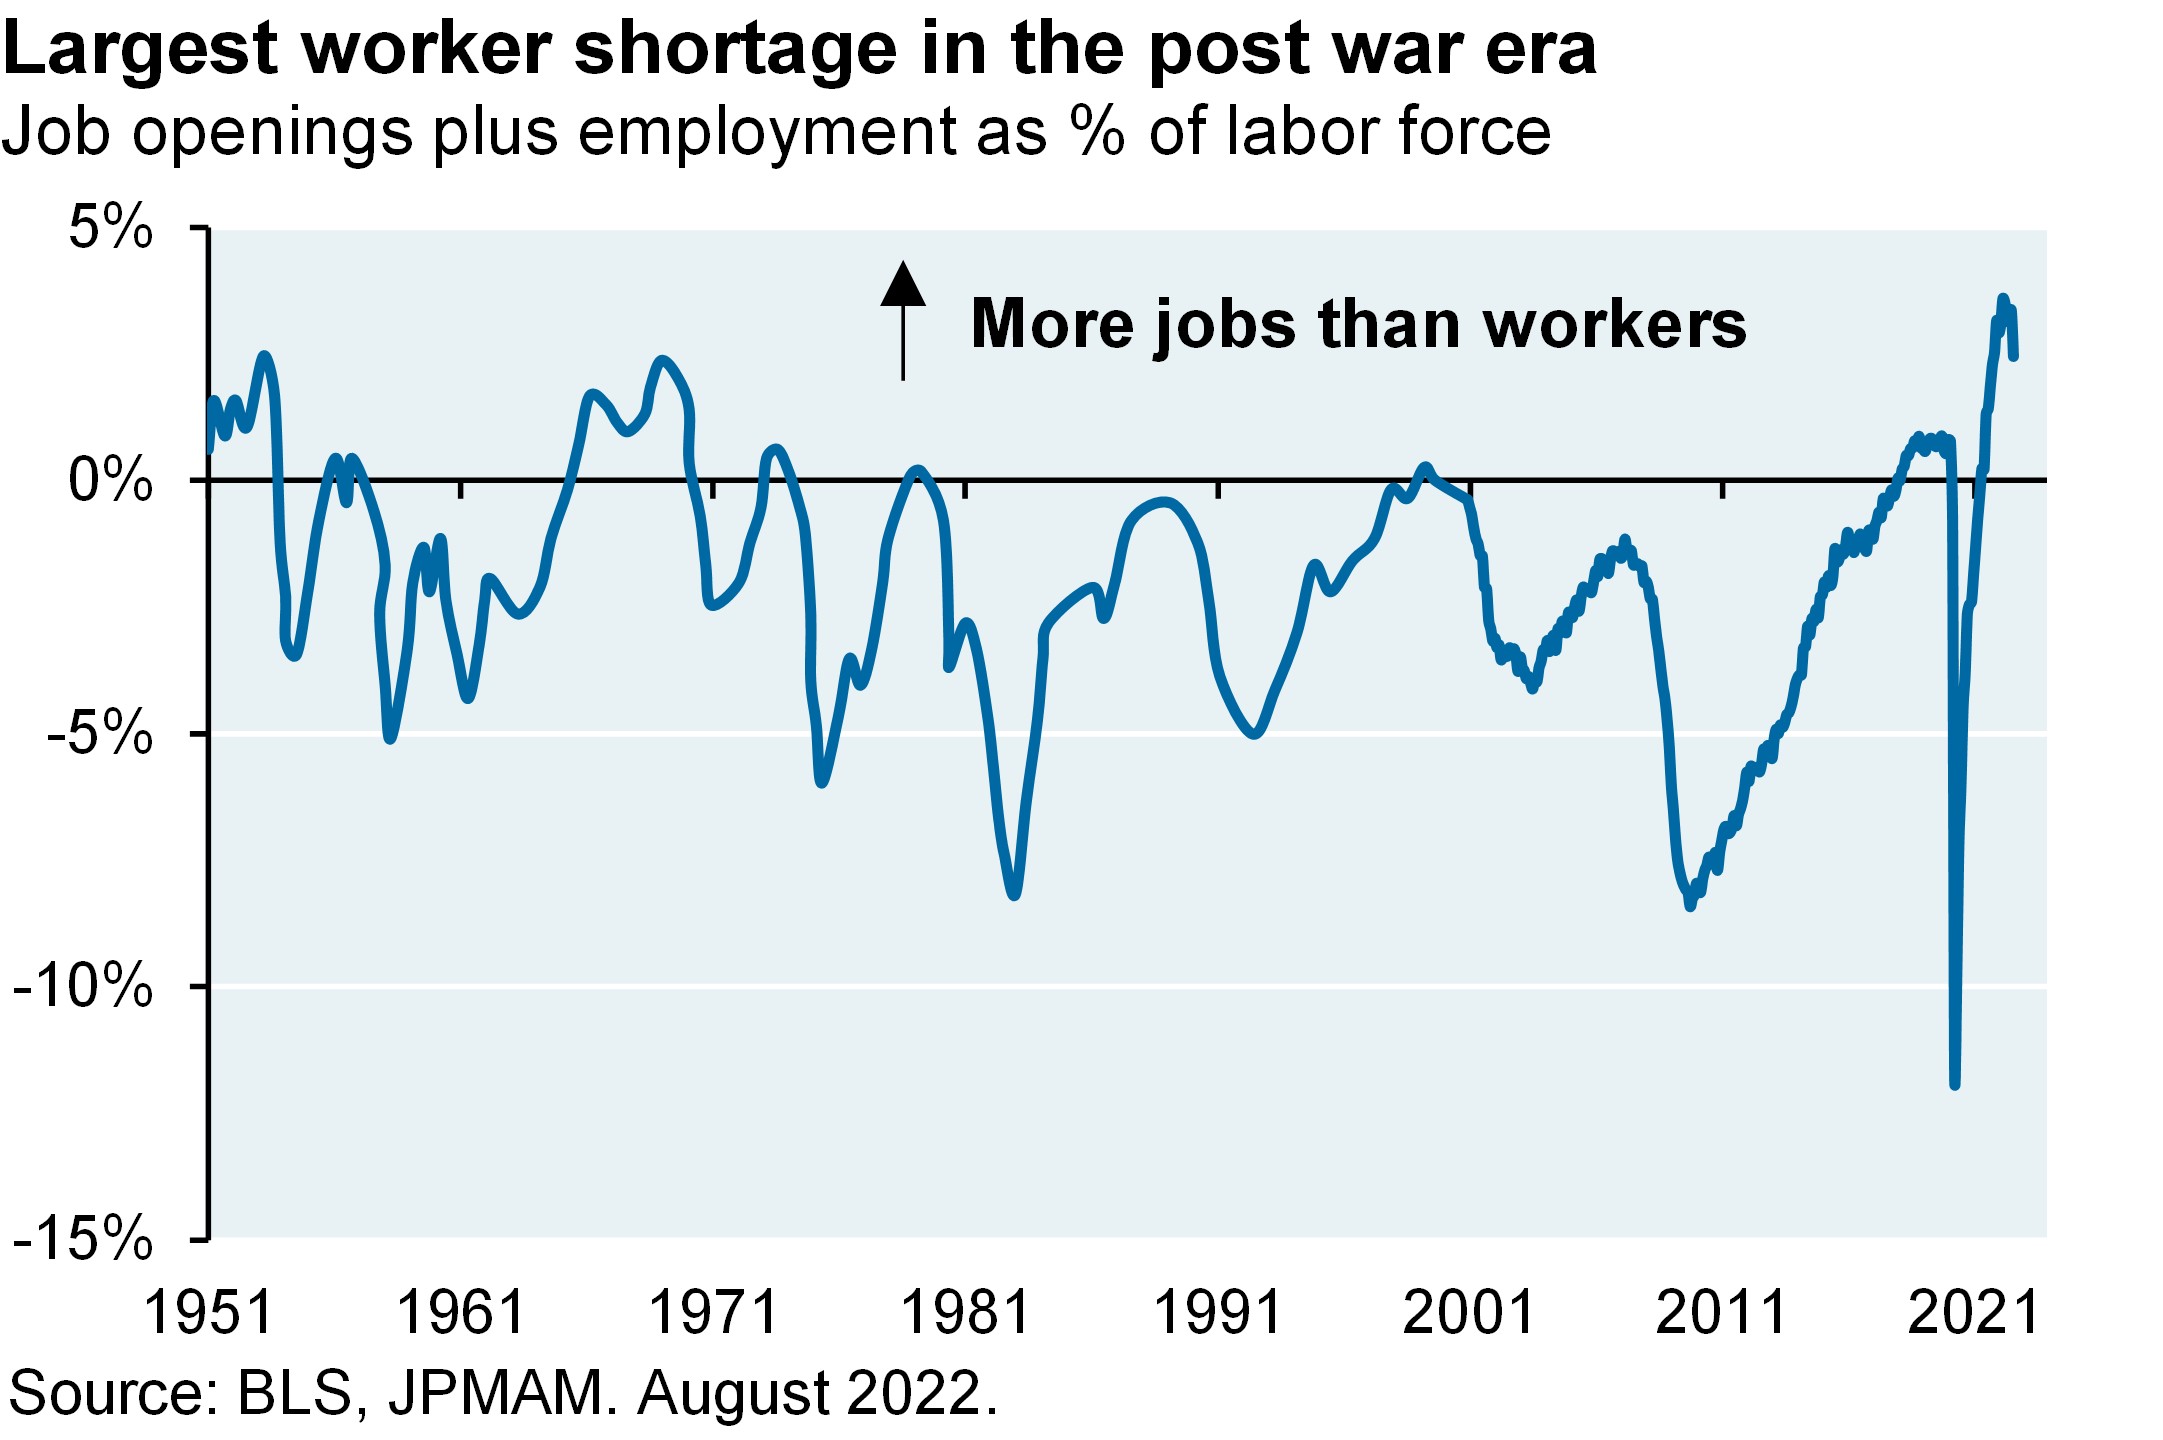 Line chart plots job openings plus employment as a percent of labor force from 1951 to July 2022, with any point above 0% signaling more jobs than workers. The chart shows that the US is experiencing the largest worker shortage in the post war era. 